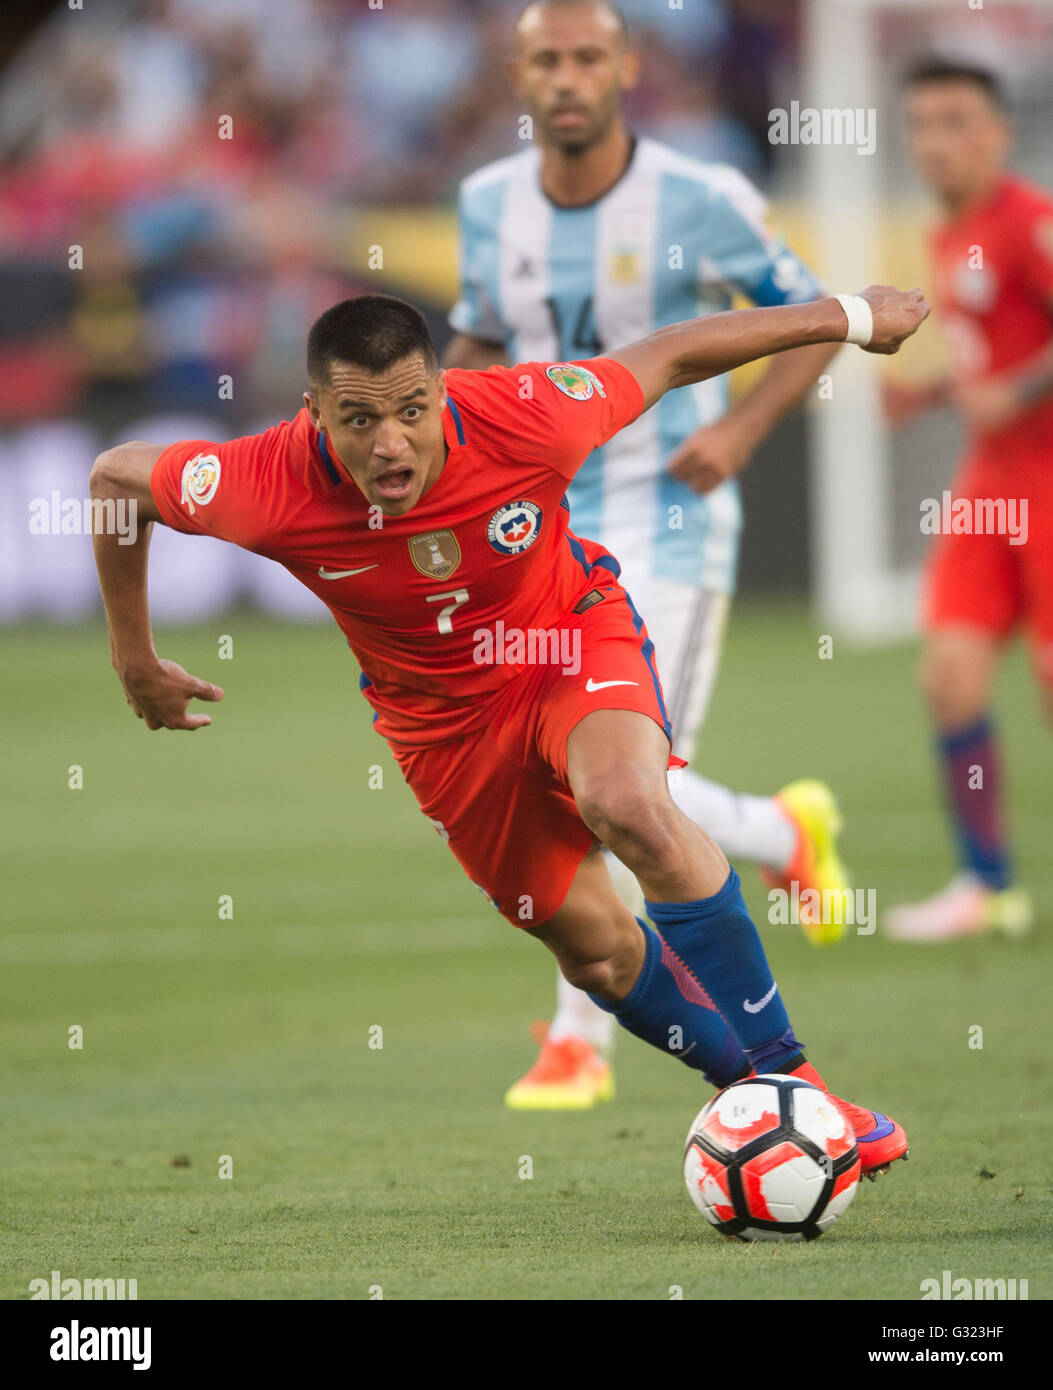 Santa Clara, USA. 6th June, 2016. Chile's Alexis Sanchez breaks through during the Copa America Centenario Group D match between Argentina and Chile at the Levi's Stadium in Santa Clara, California, the United States, June 6, 2016. Argentina won by 2-1. Credit:  Yang Lei/Xinhua/Alamy Live News Stock Photo